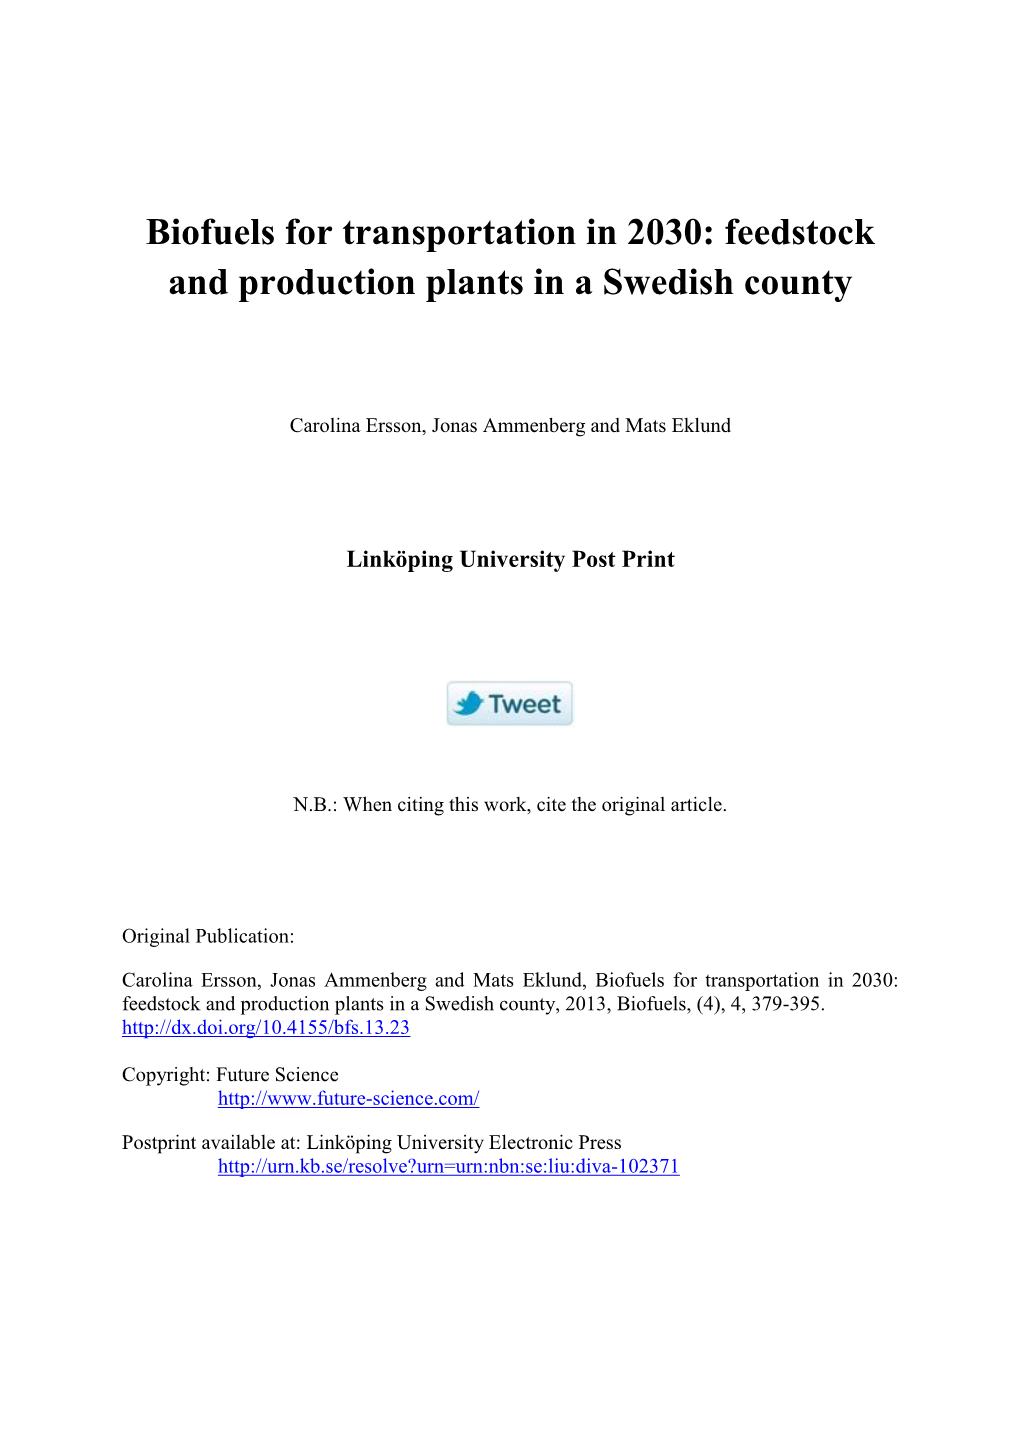 Biofuels for Transportation in 2030: Feedstock and Production Plants in a Swedish County